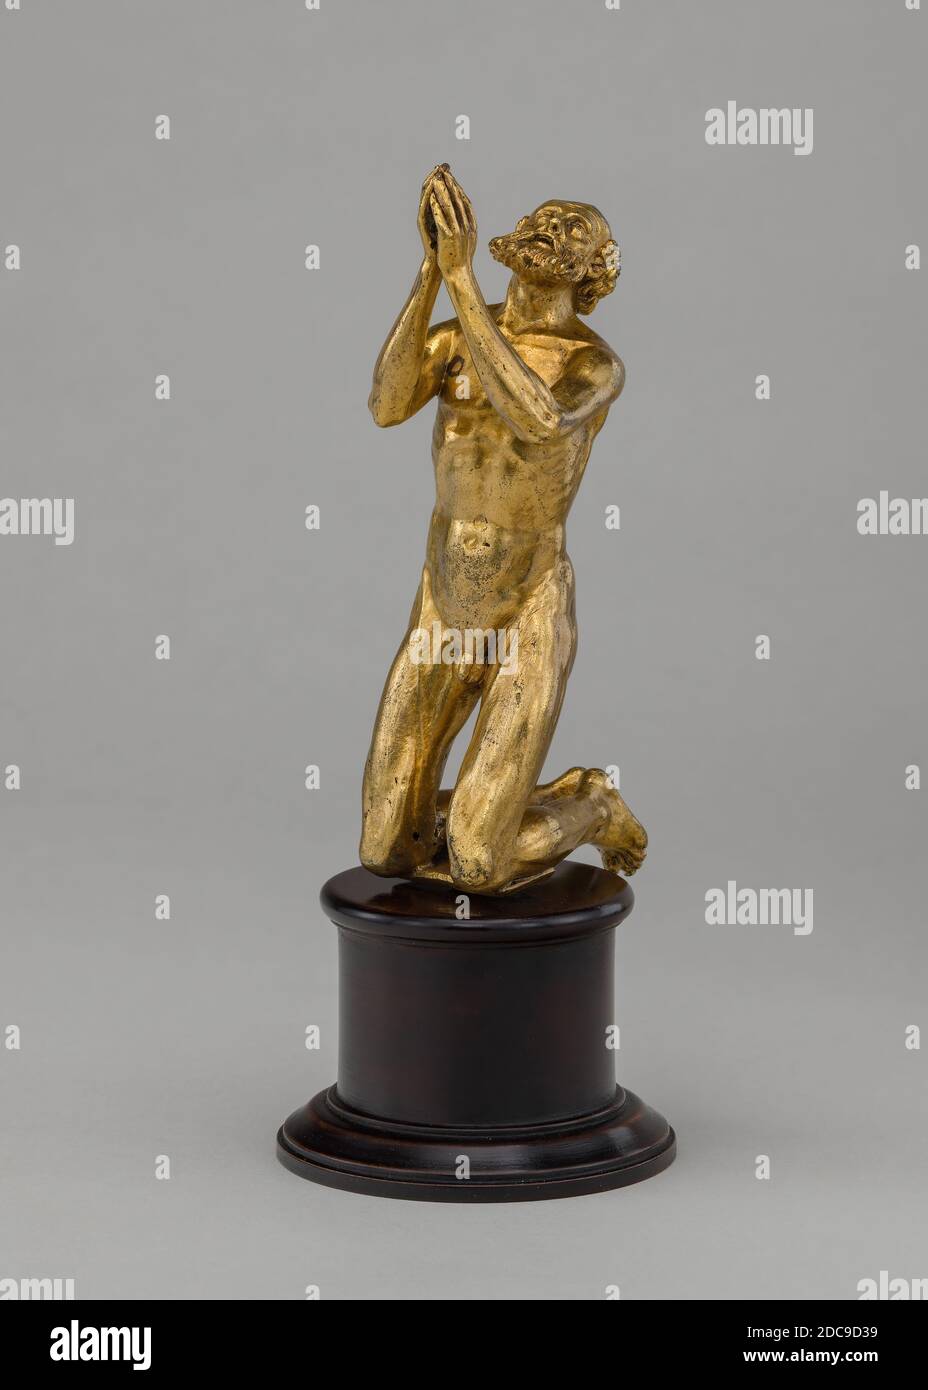 Spanish 16th Century, (sculptor), Kneeling Supplicant, 16th century, gilded bronze, overall: 10.3 x 3.2 x 6.1 cm (4 1/16 x 1 1/4 x 2 3/8 in Stock Photo